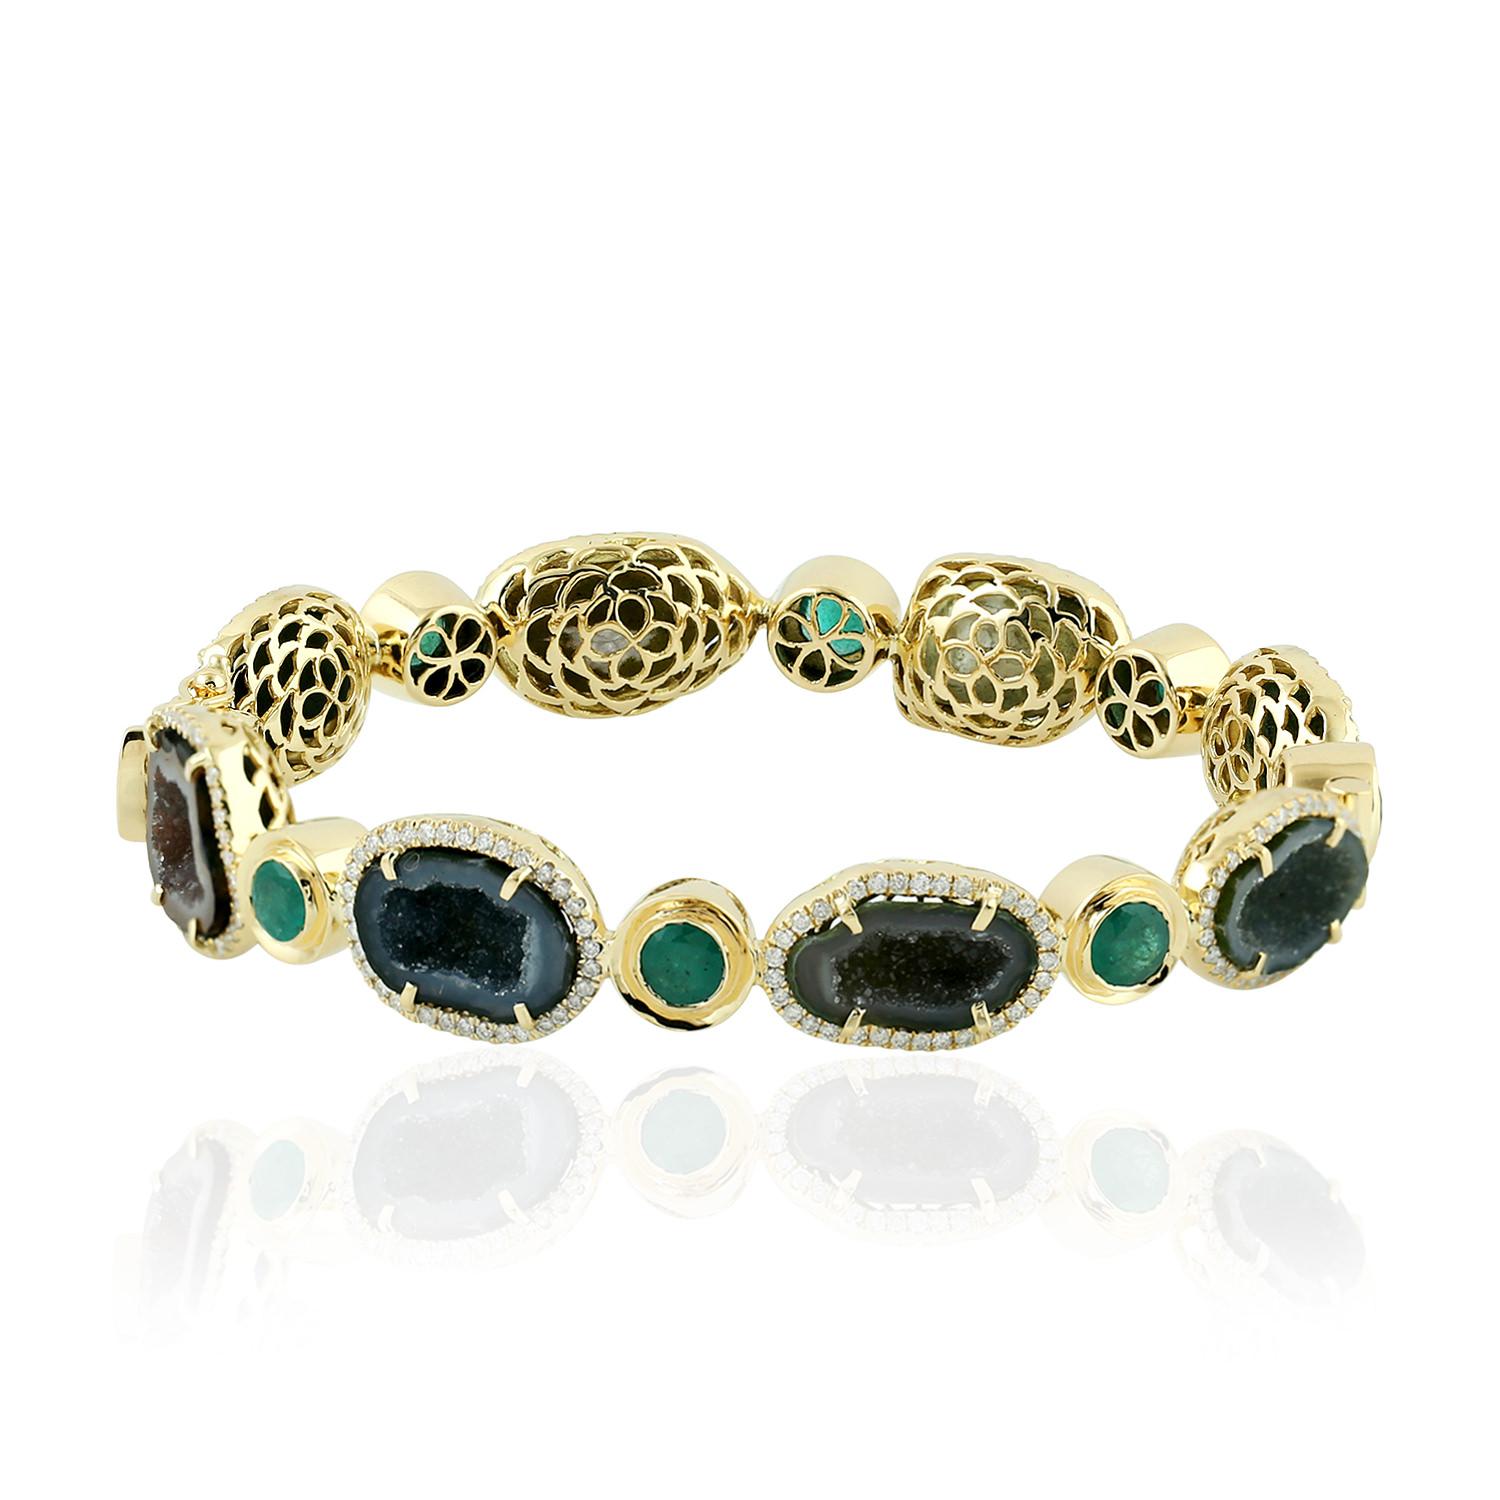 Mixed Cut Emerald & Geode Bracelet with Pave Diamonds Made in 18k Yellow Gold For Sale